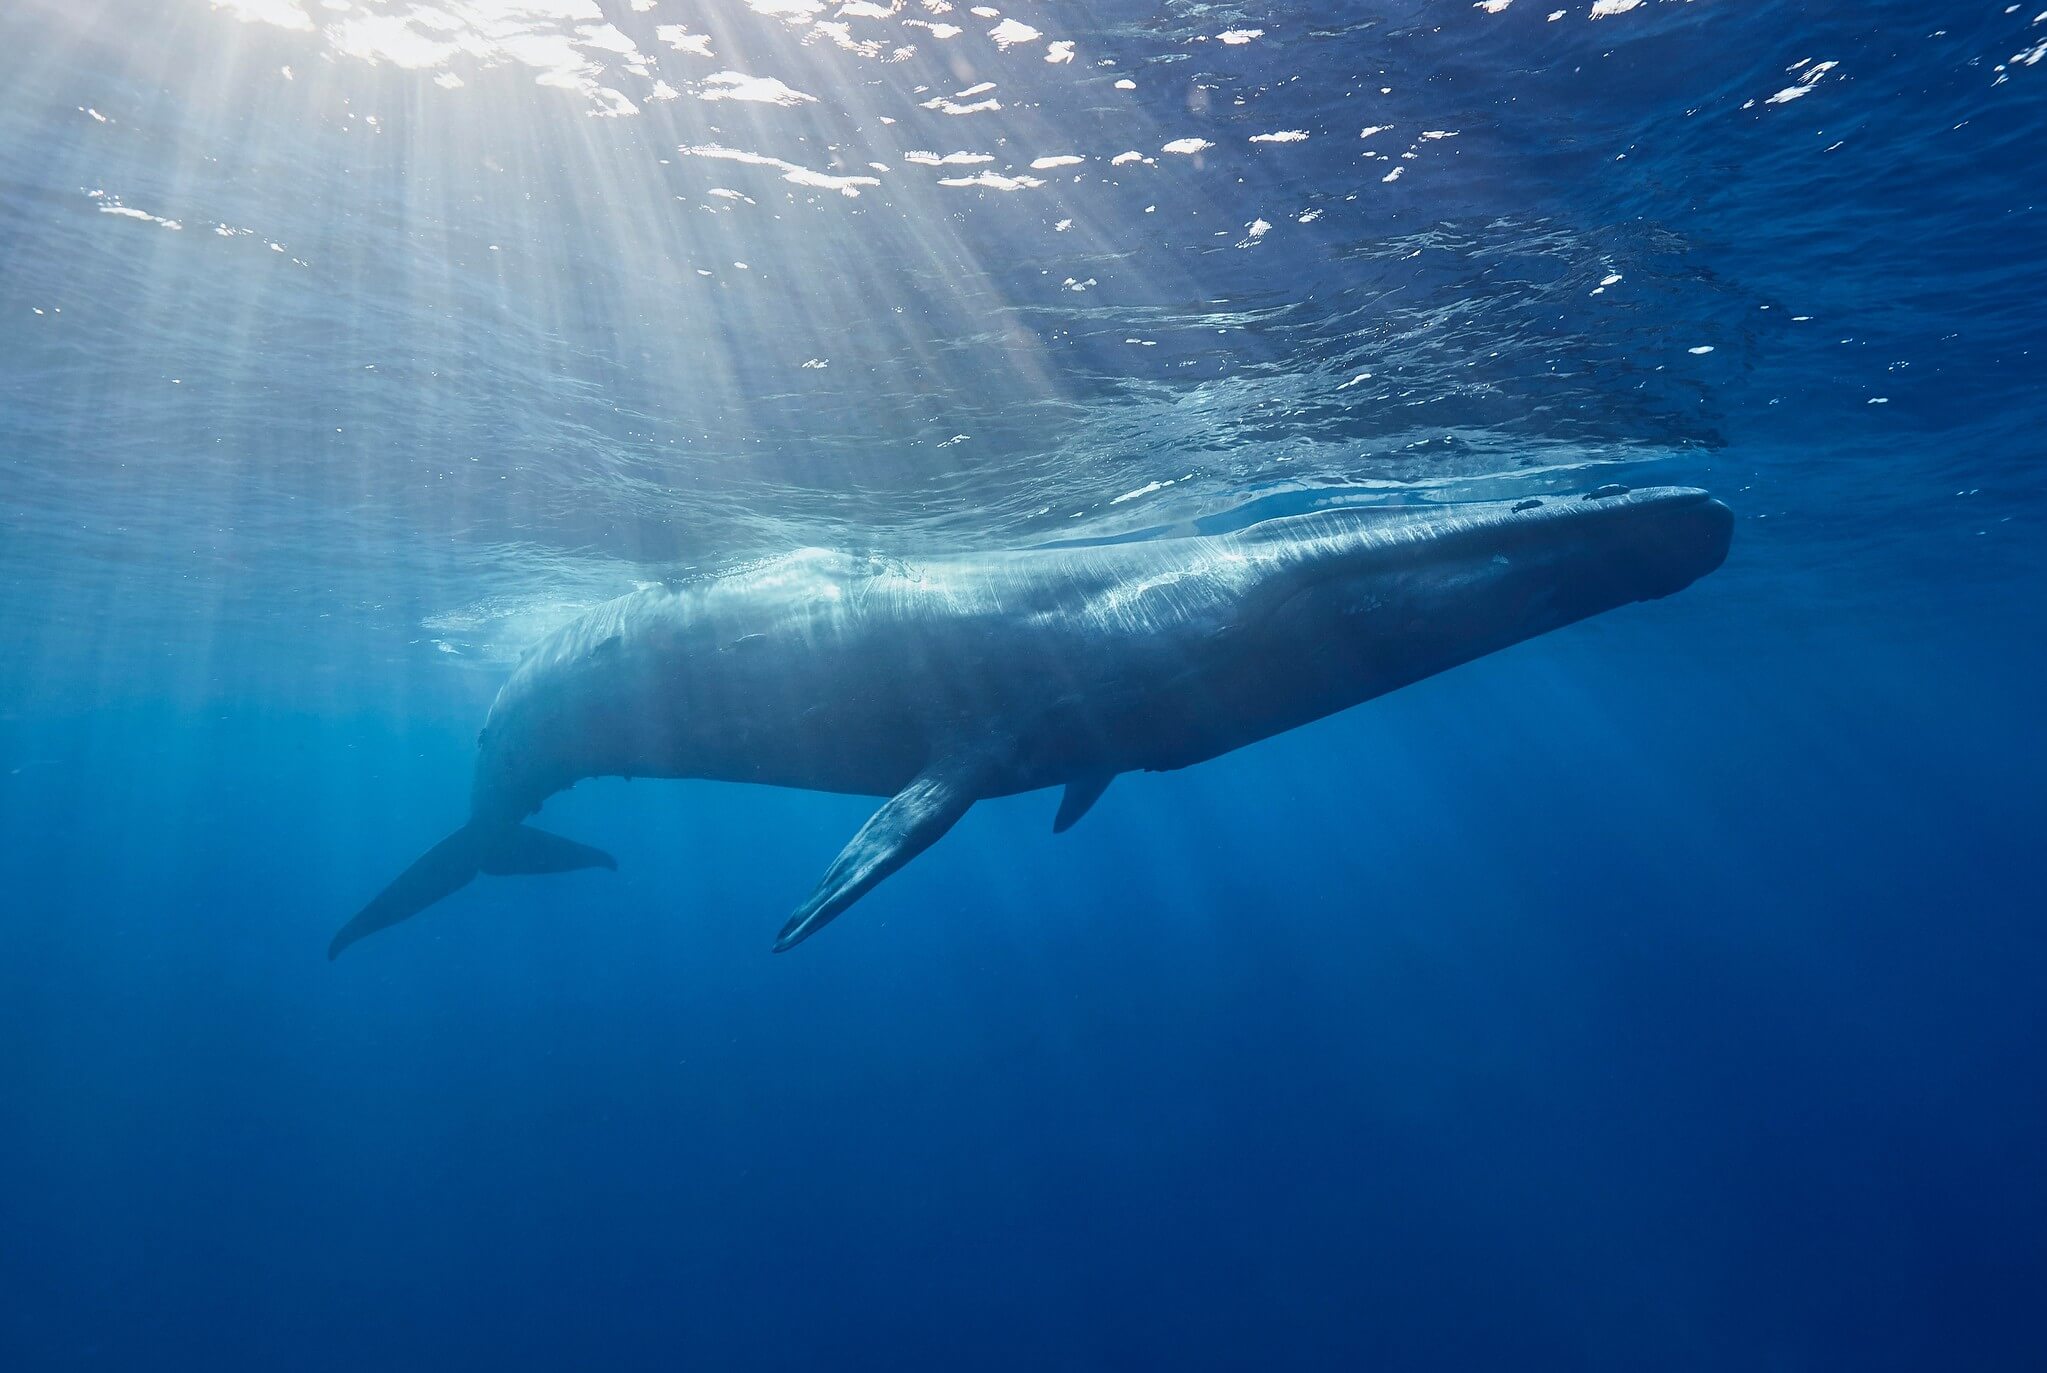 Image: blue whale (Balaenoptera musculus).